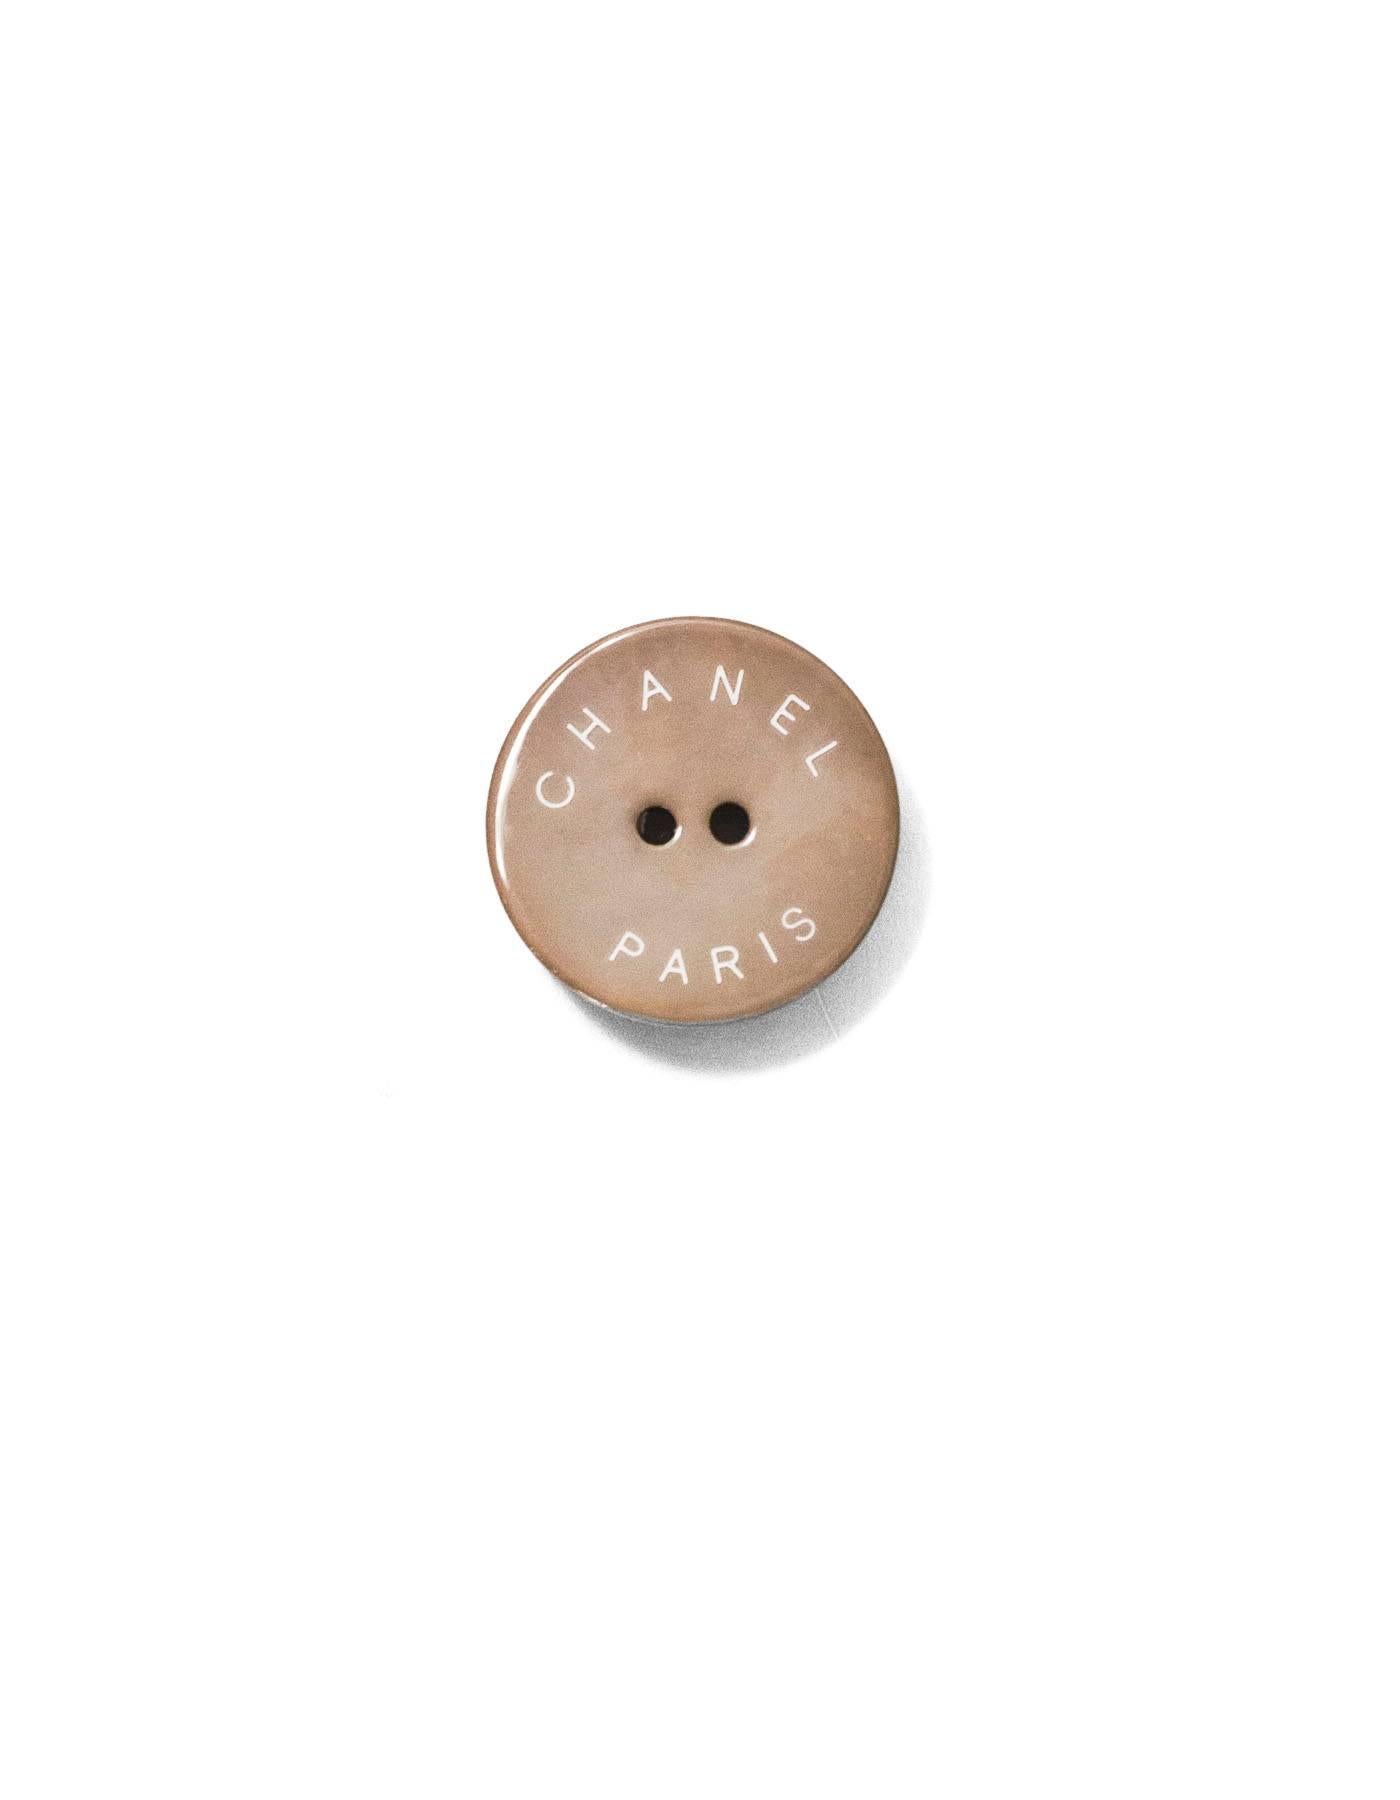 Chanel Taupe CHANEL PARIS Glass Buttons
Features set of two 22mm buttons and one 18mm button

Color: Taupe
Materials: Glass
Stamp: Chanel Paris
Overall Condition: Excellent good pre-owned condition, light surface marks/soiling

Measurements: